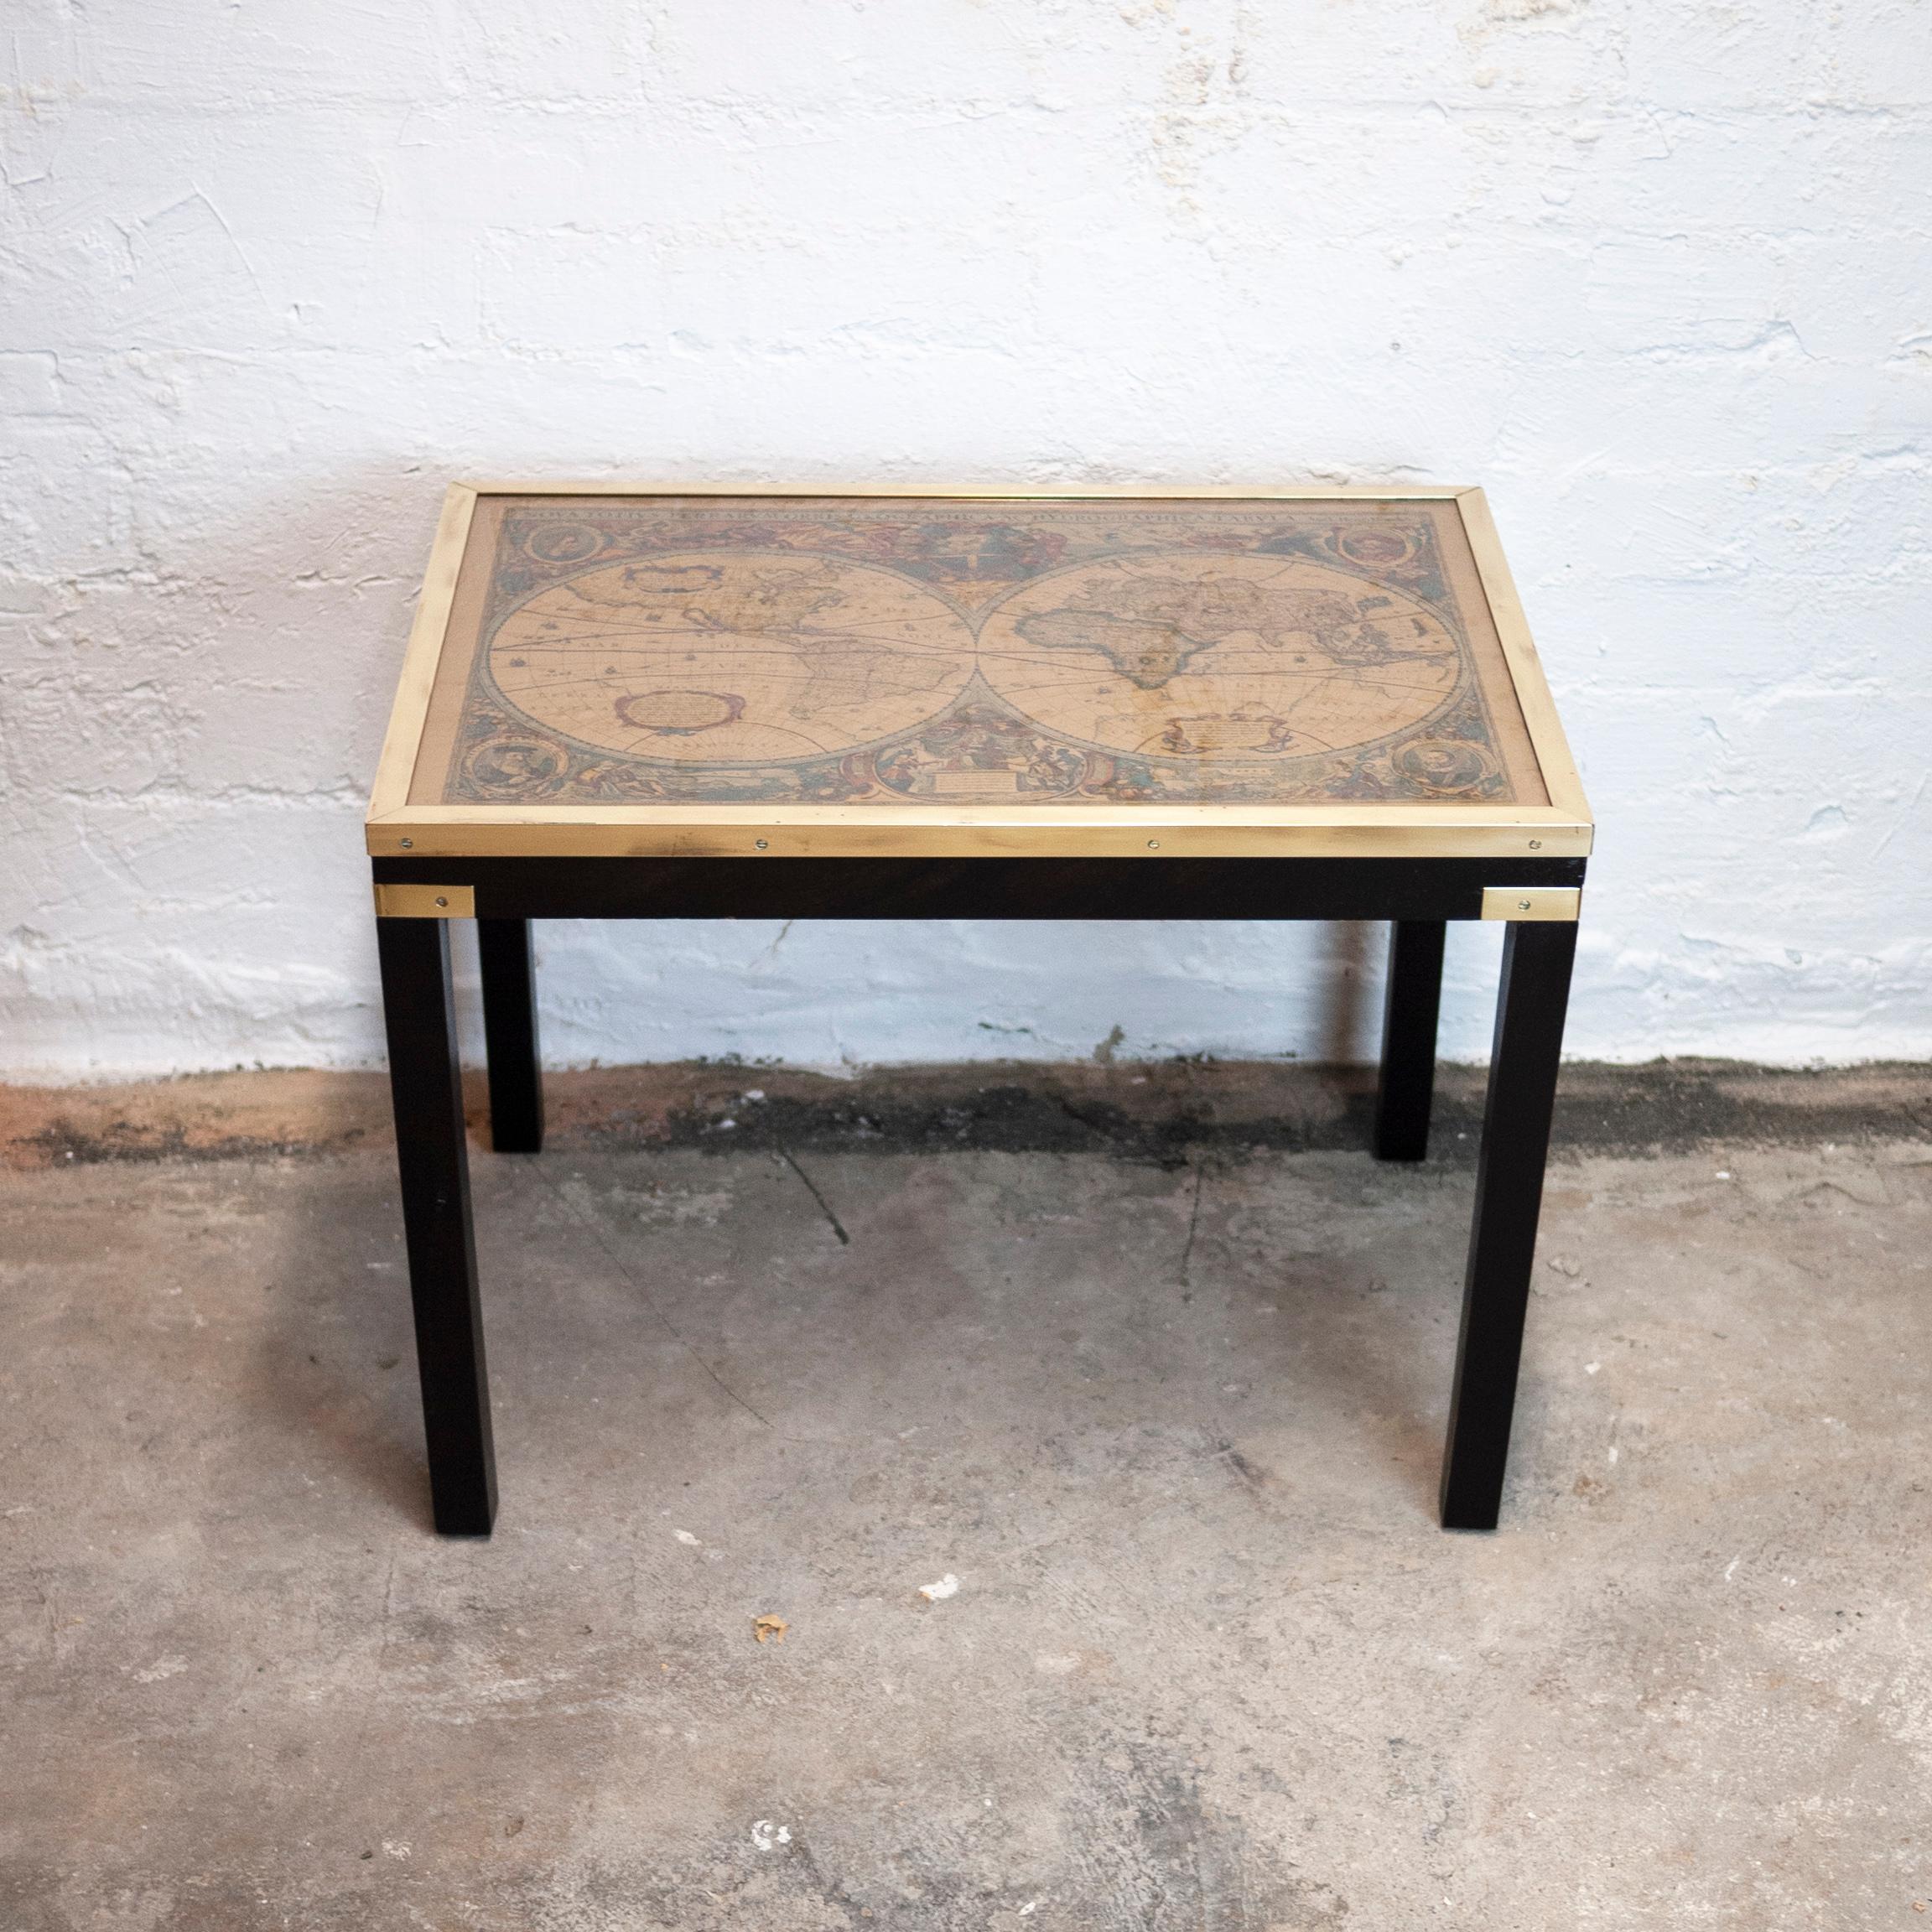 A vintage brass and glass topped side table with map.

Designer - Unknown

Design Period - 1970 to 1979

Detailed Condition - Good with minimal defects.

Restoration and Damage Details - Light wear consistent with age and use.

Materials -